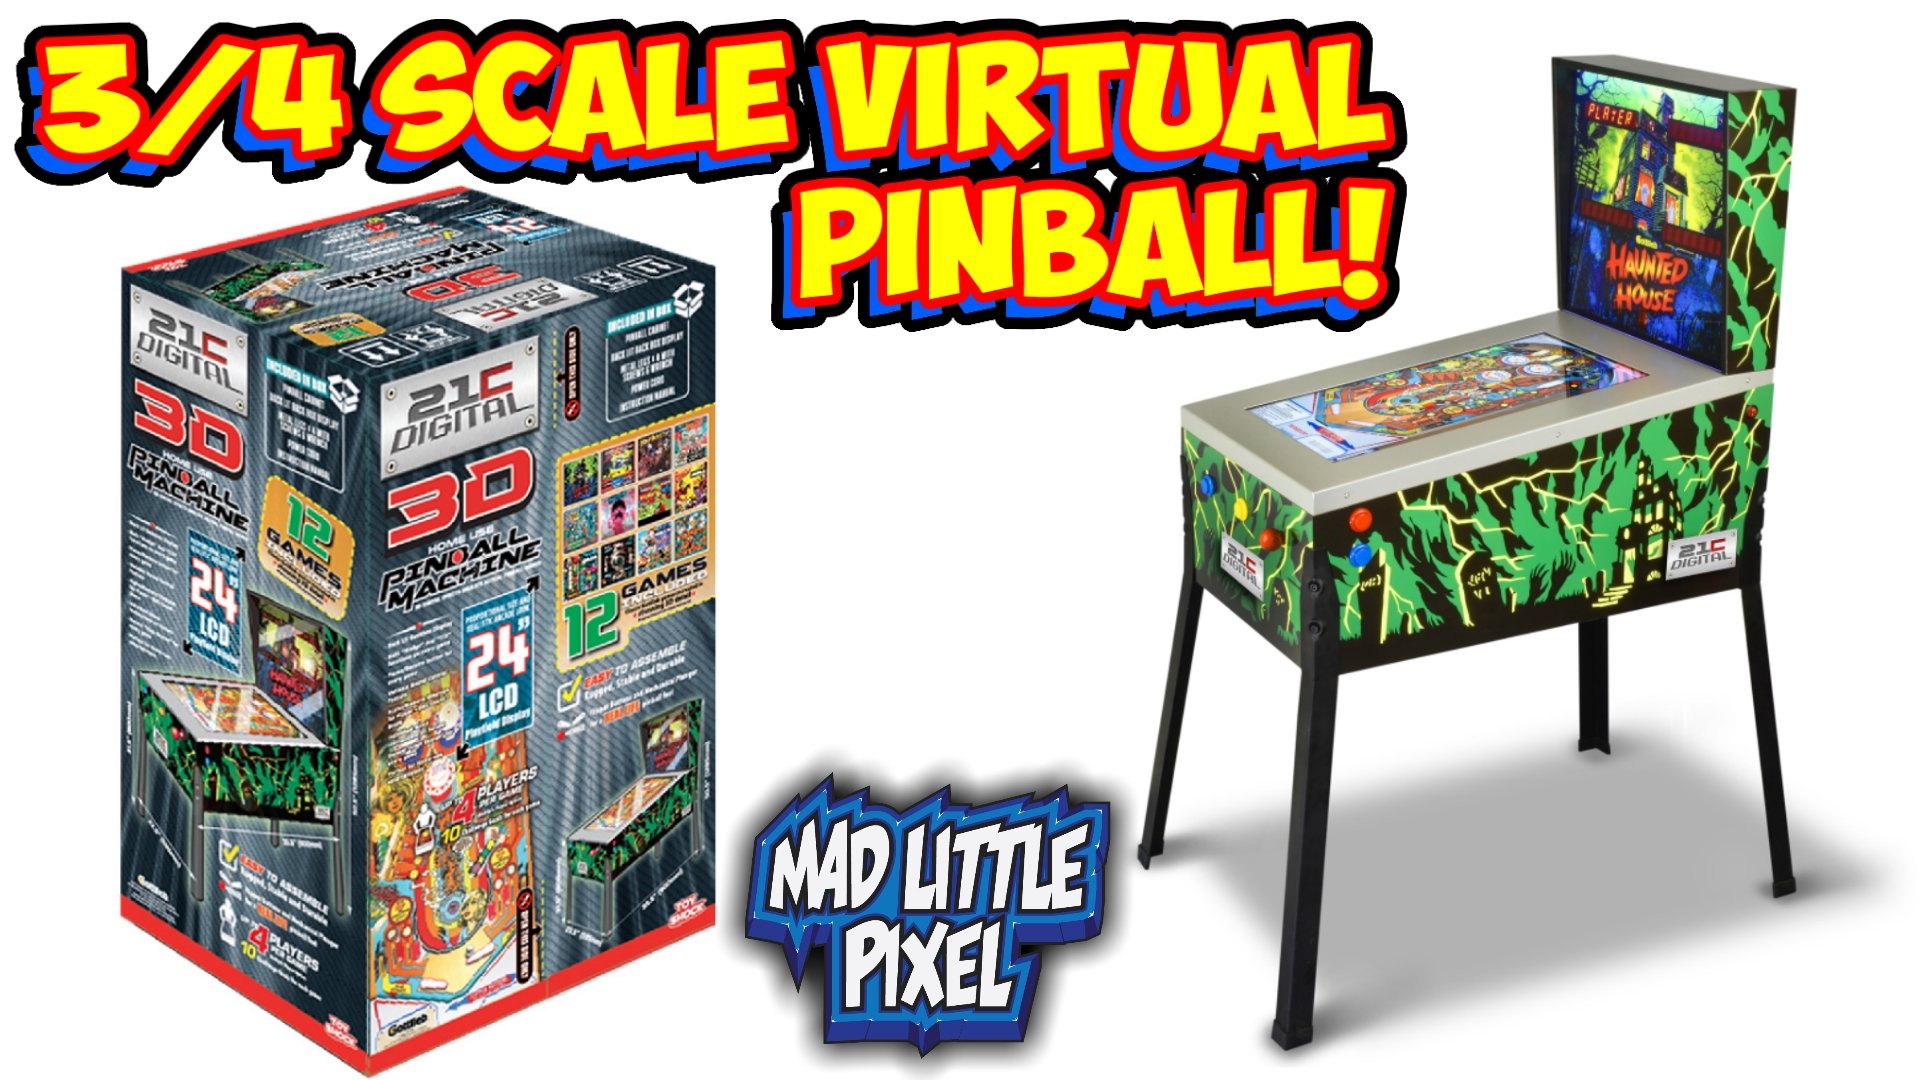 Replying to @omgauser well I guess I have more than 3 #pinball #arcade, Online Arcade